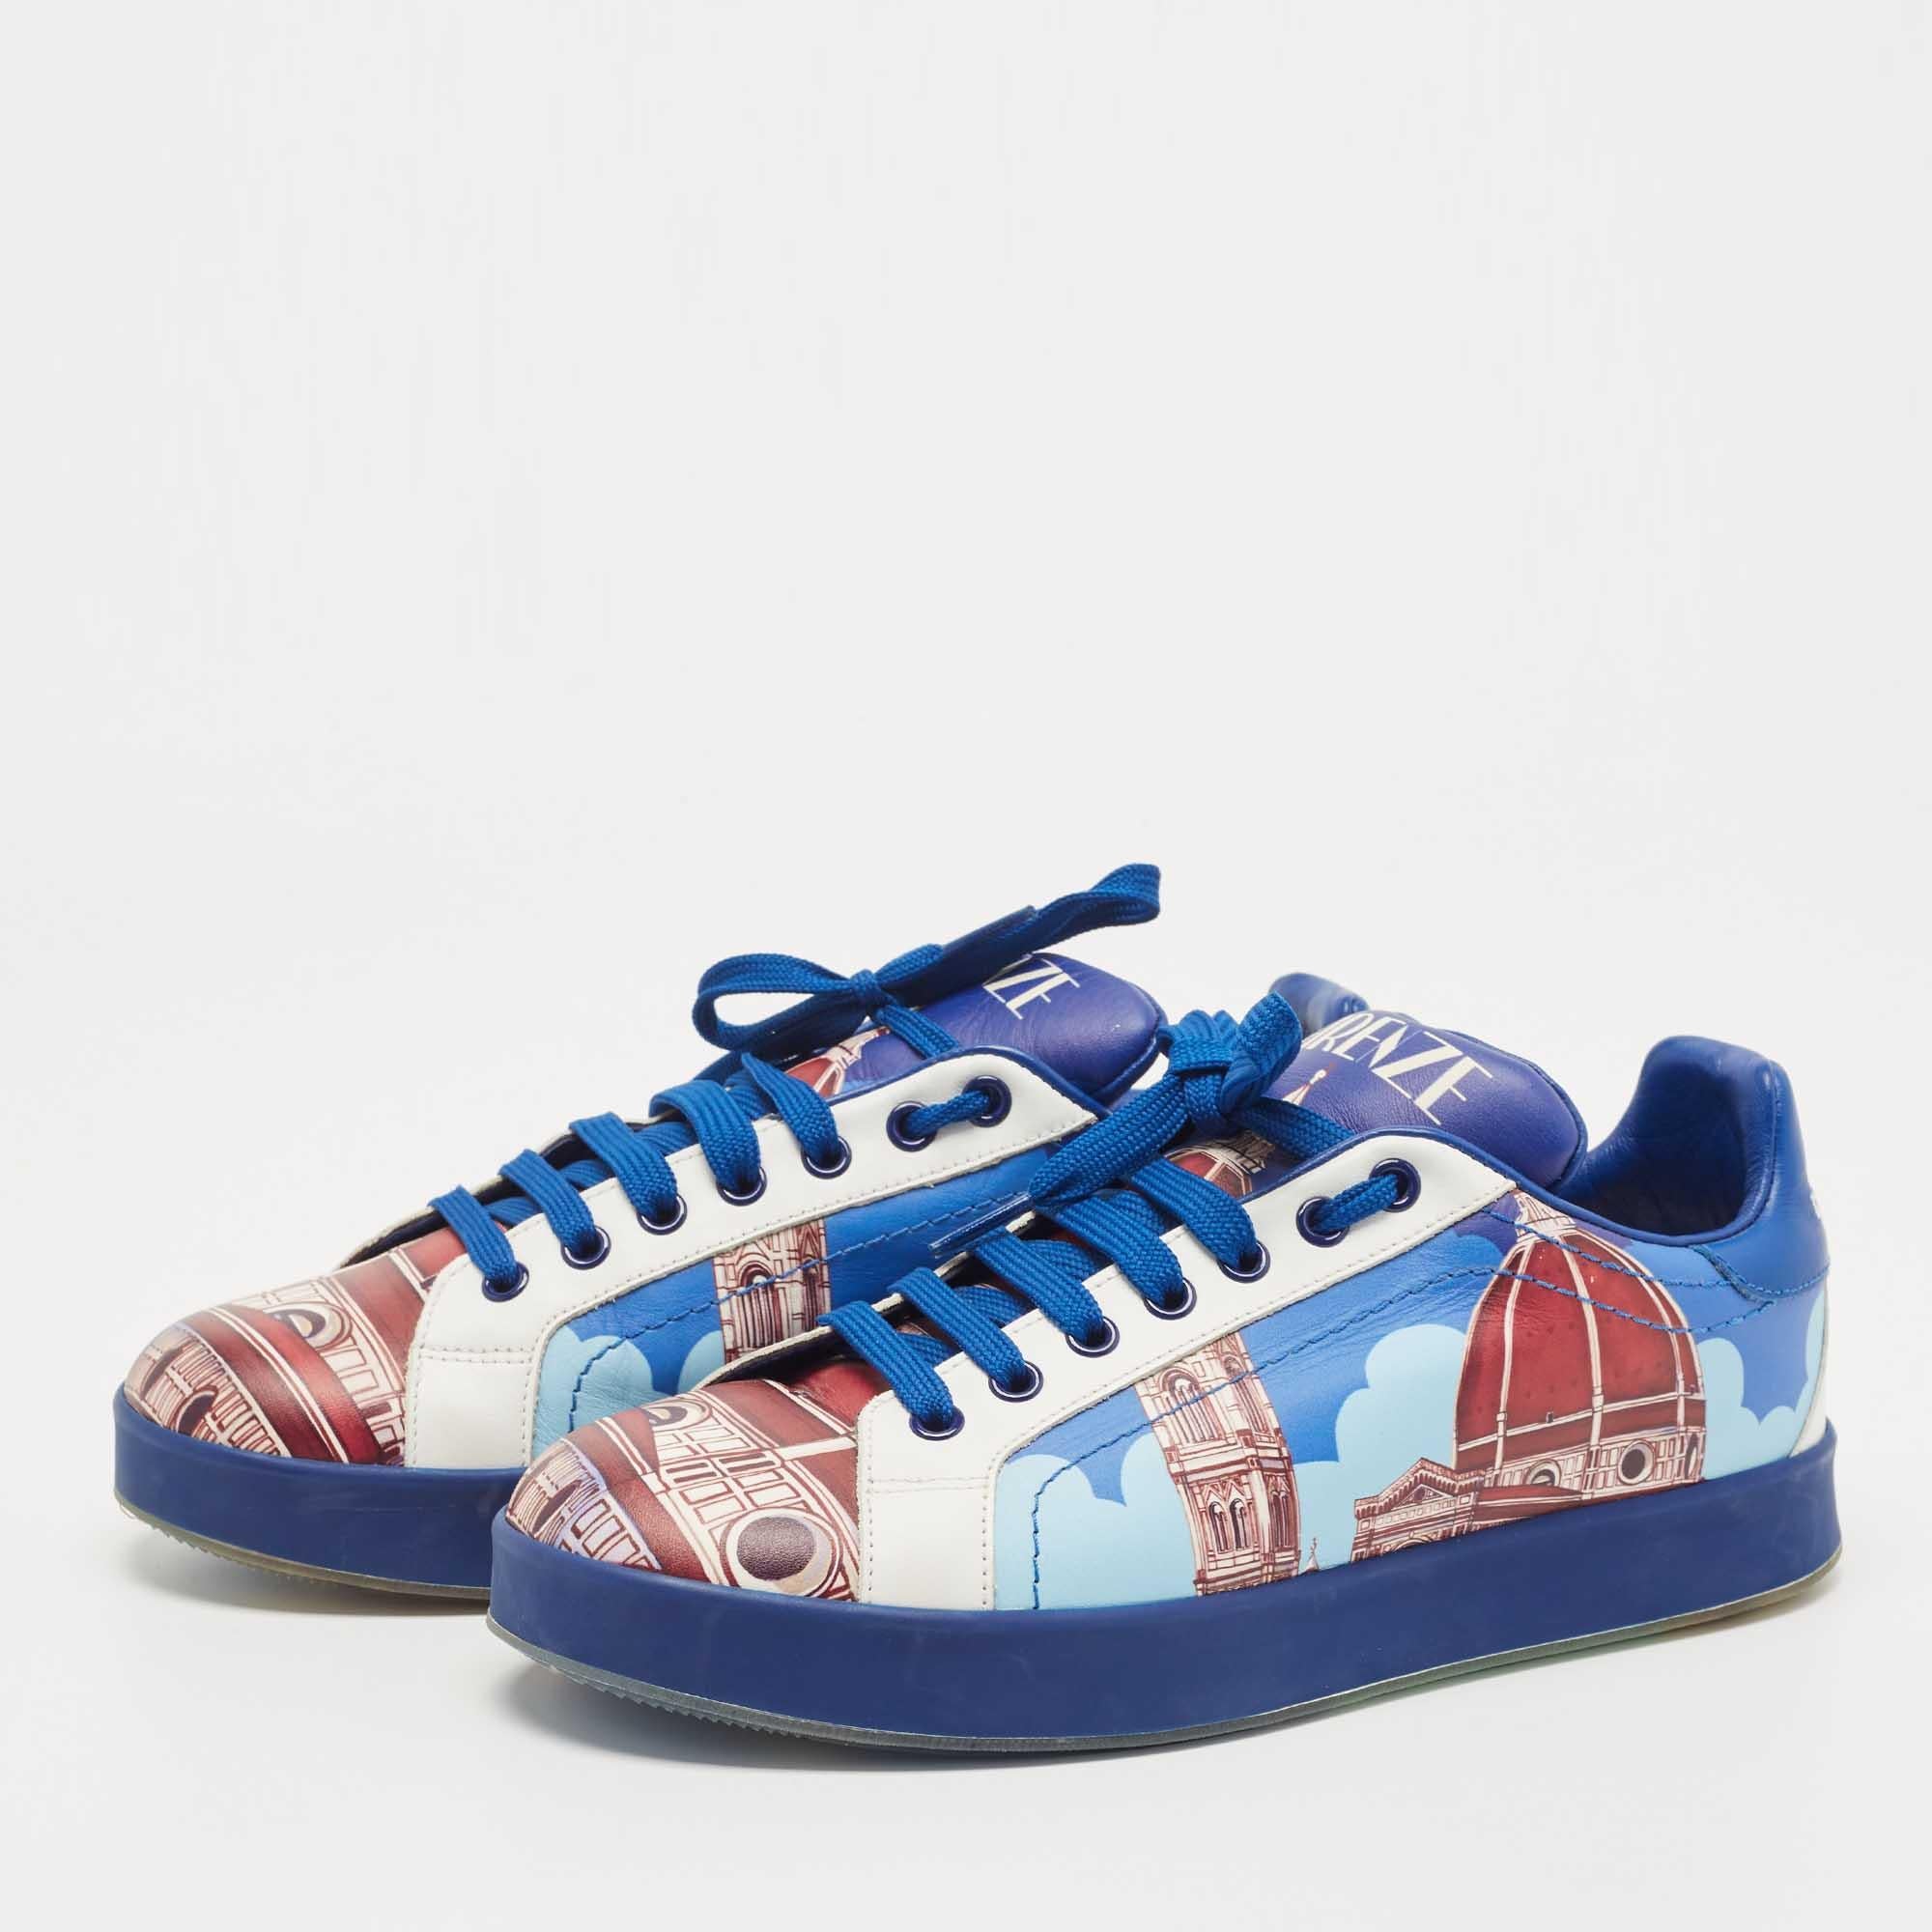 Dolce & Gabbana Tricolor Printed Leather Low Top Sneakers Size 39.5 4